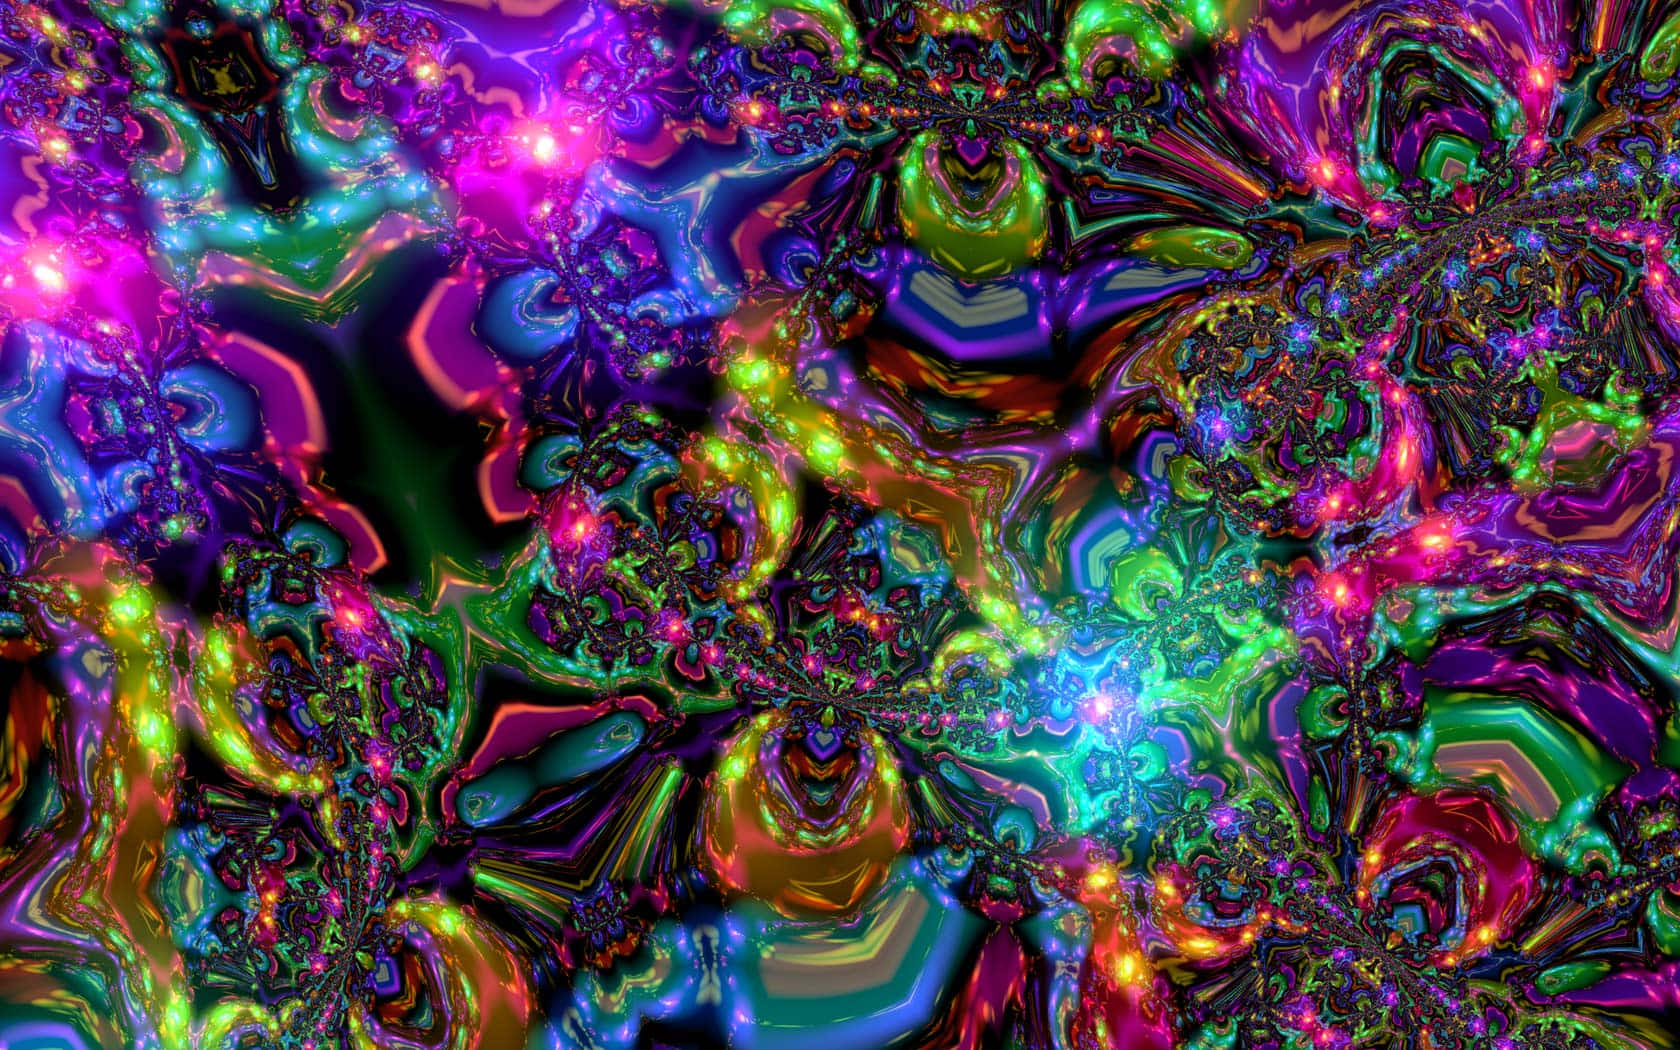 A Colorful Fractal Art Image With Many Colorful Lights